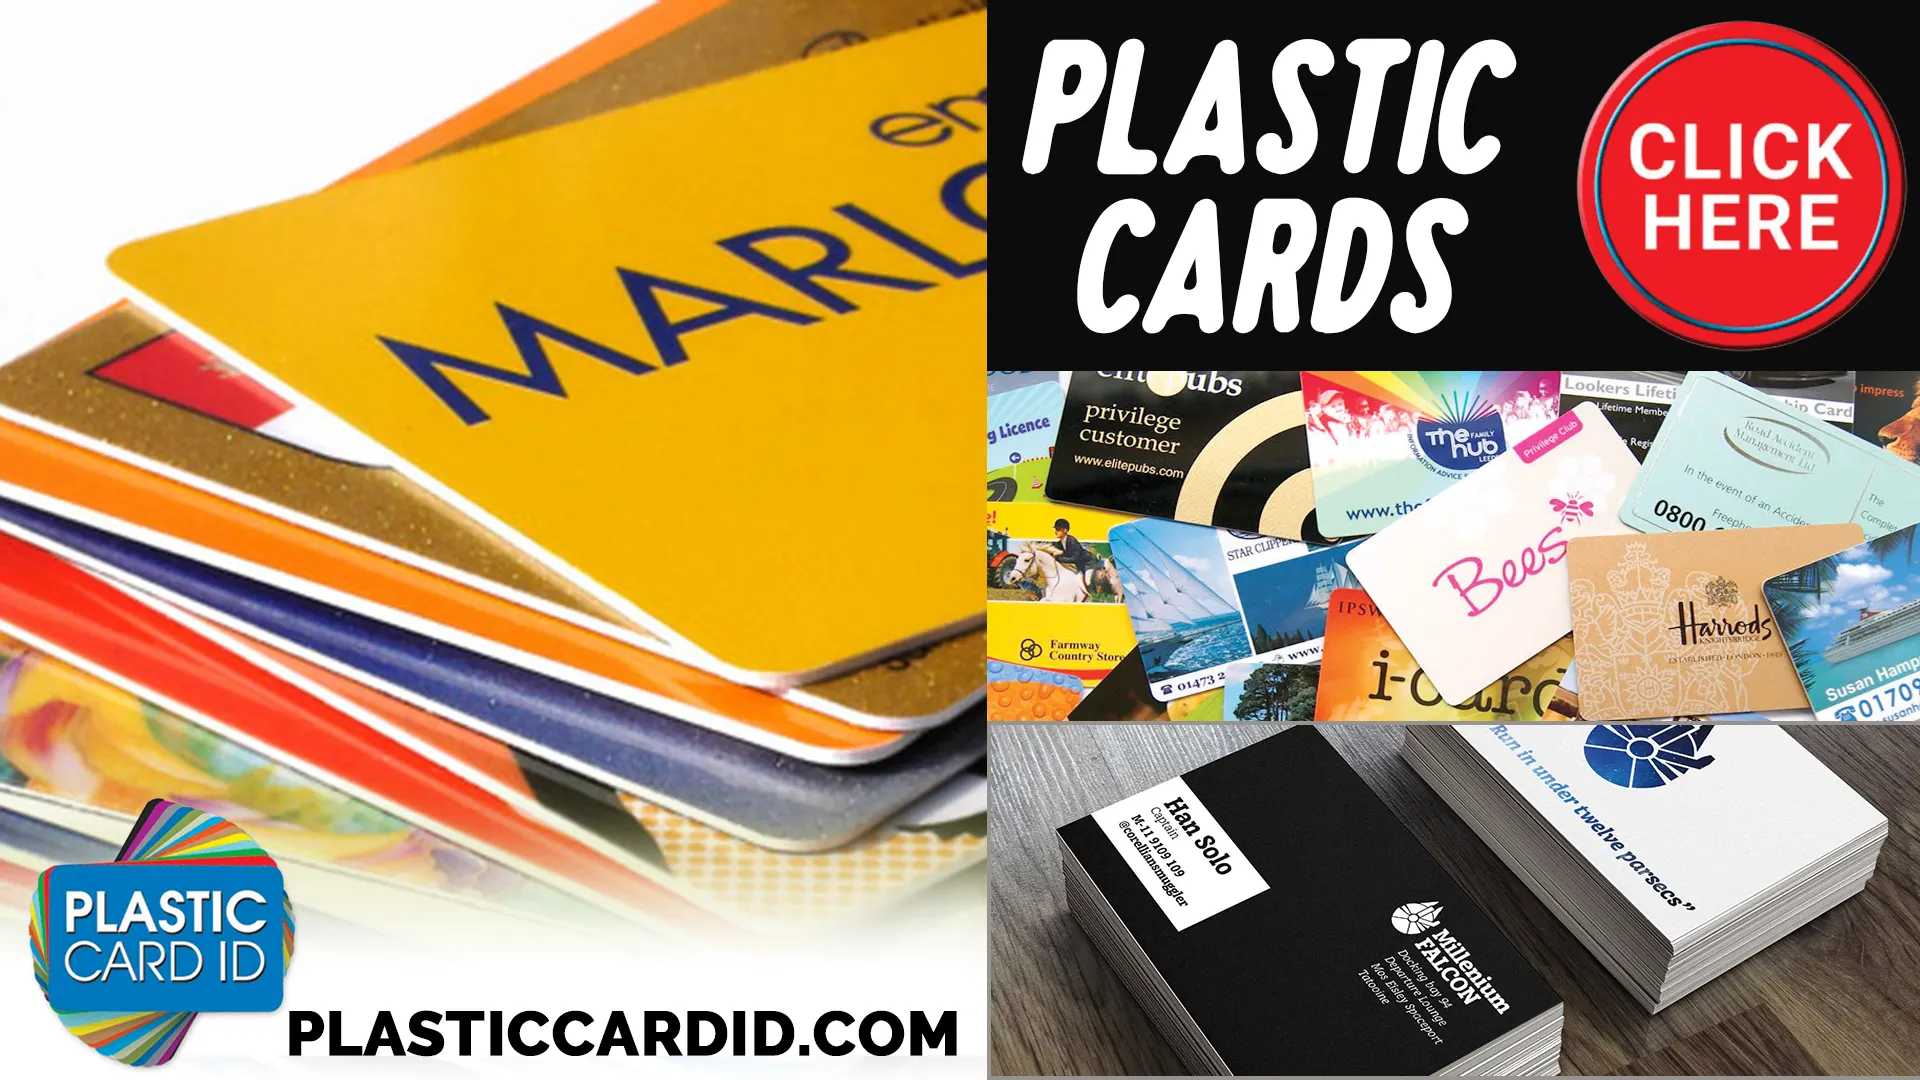 Welcome to Plastic Card ID




: Where Quality Meets Compatibility